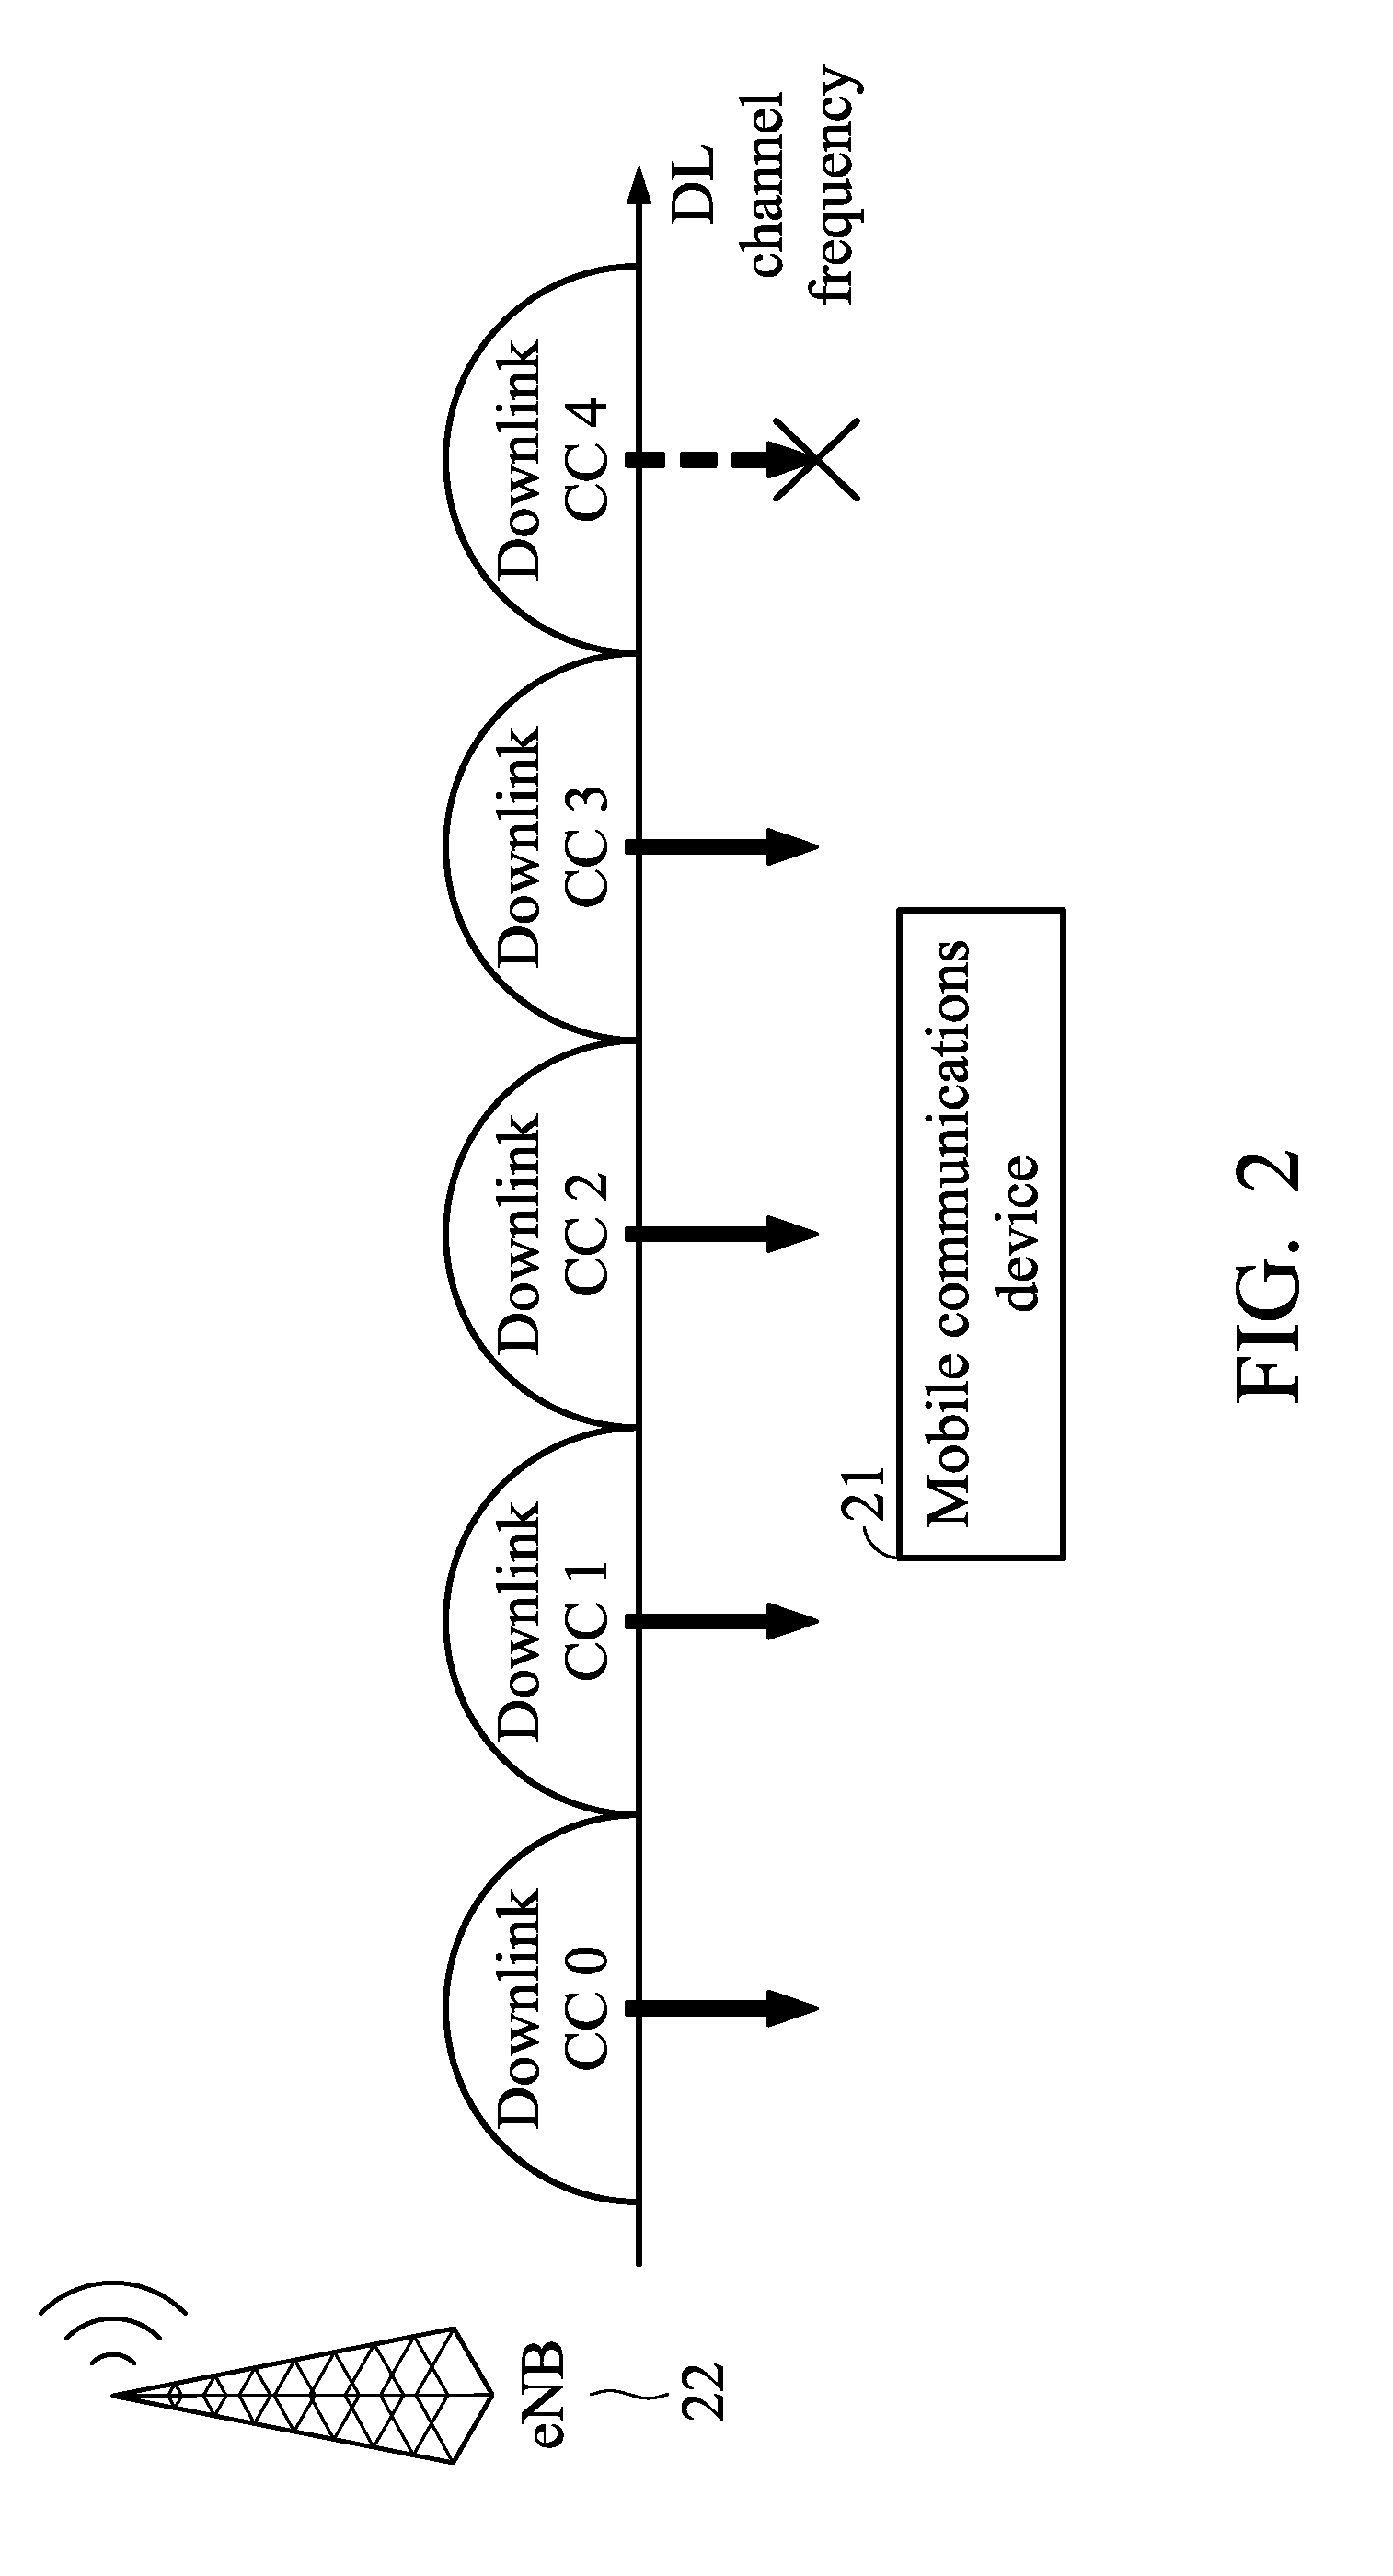 Systems and methods for reporting radio link failure